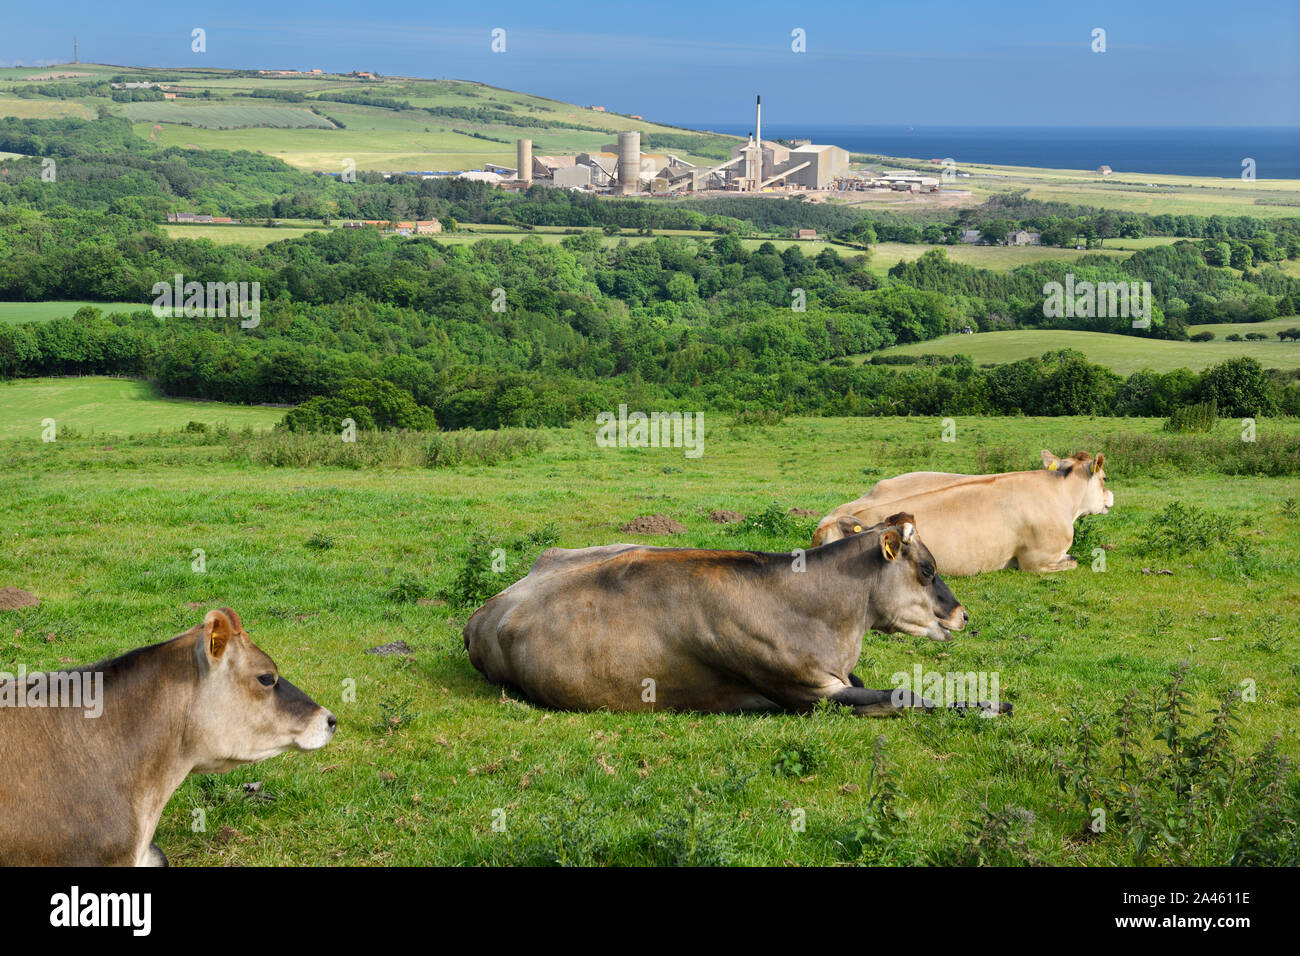 Guernsey dairy cows lying in a grass field with Boulby Mine factory for potash fertilizer on the North Sea North York Moors National Park England Stock Photo